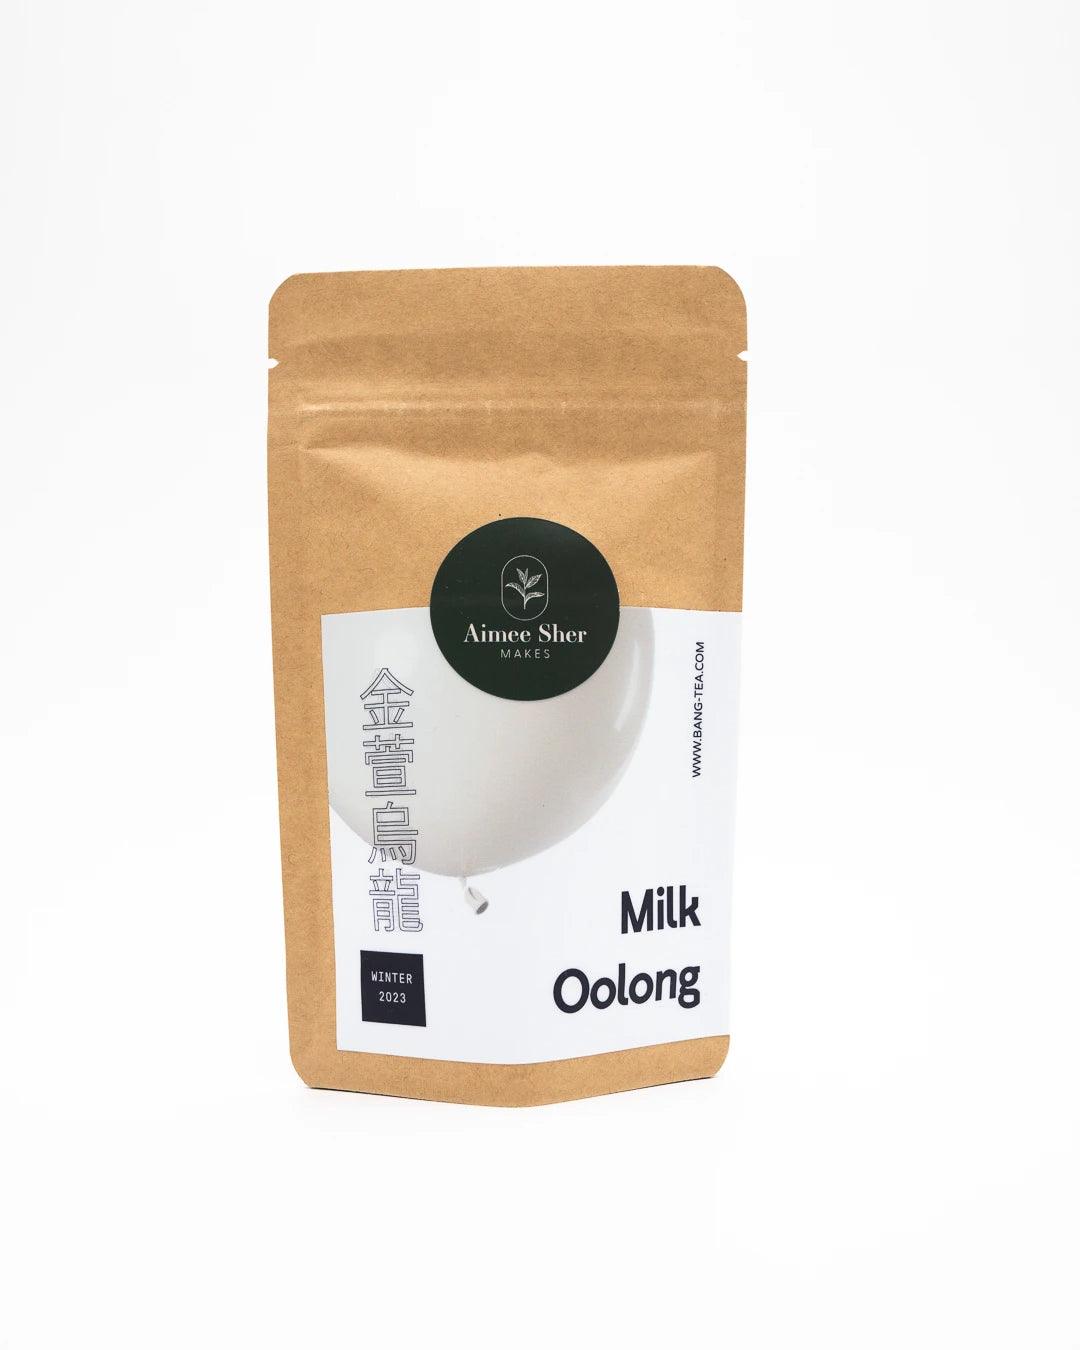 Milk Oolong (Winter 2023) - Aimee Sher Makes